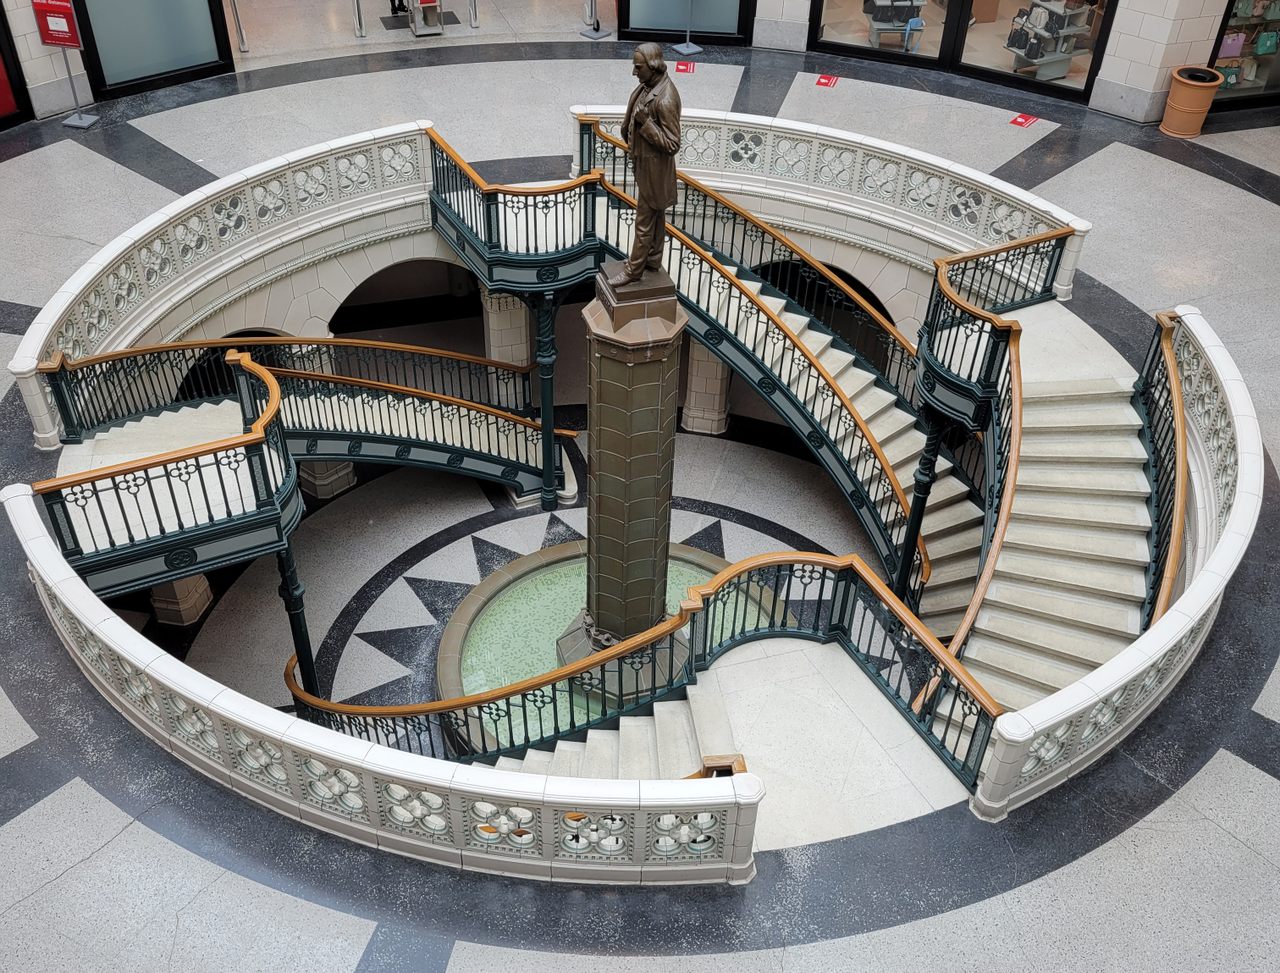 Treasure hunter Tom Klein believes the statue of John Plankinton in Milwaukee's Plankinton Arcade is one of the clues to <em>The Secret</em>'s buried treasure.